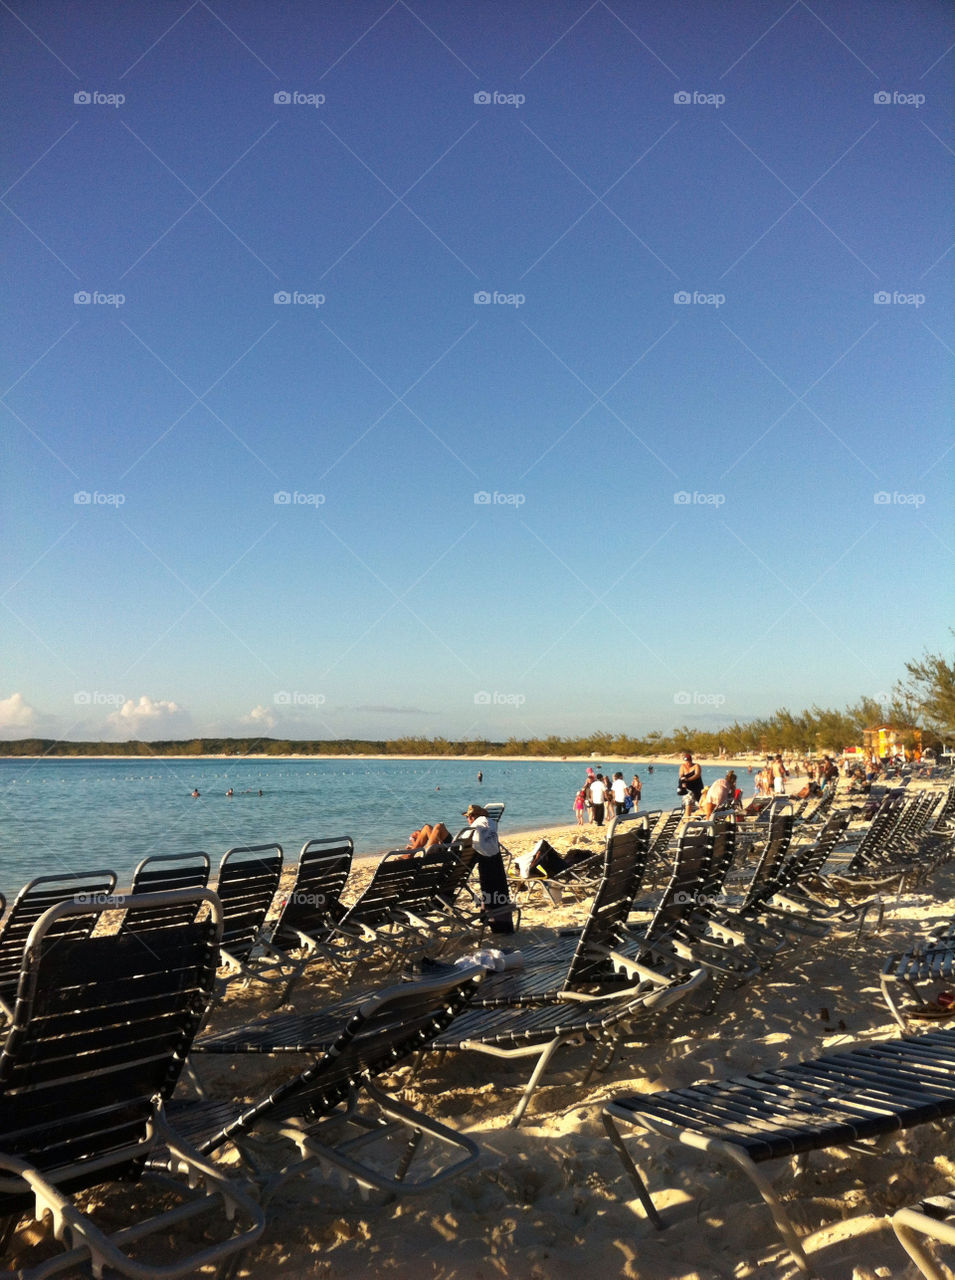 Many chairs on a beach in the Caribbean.